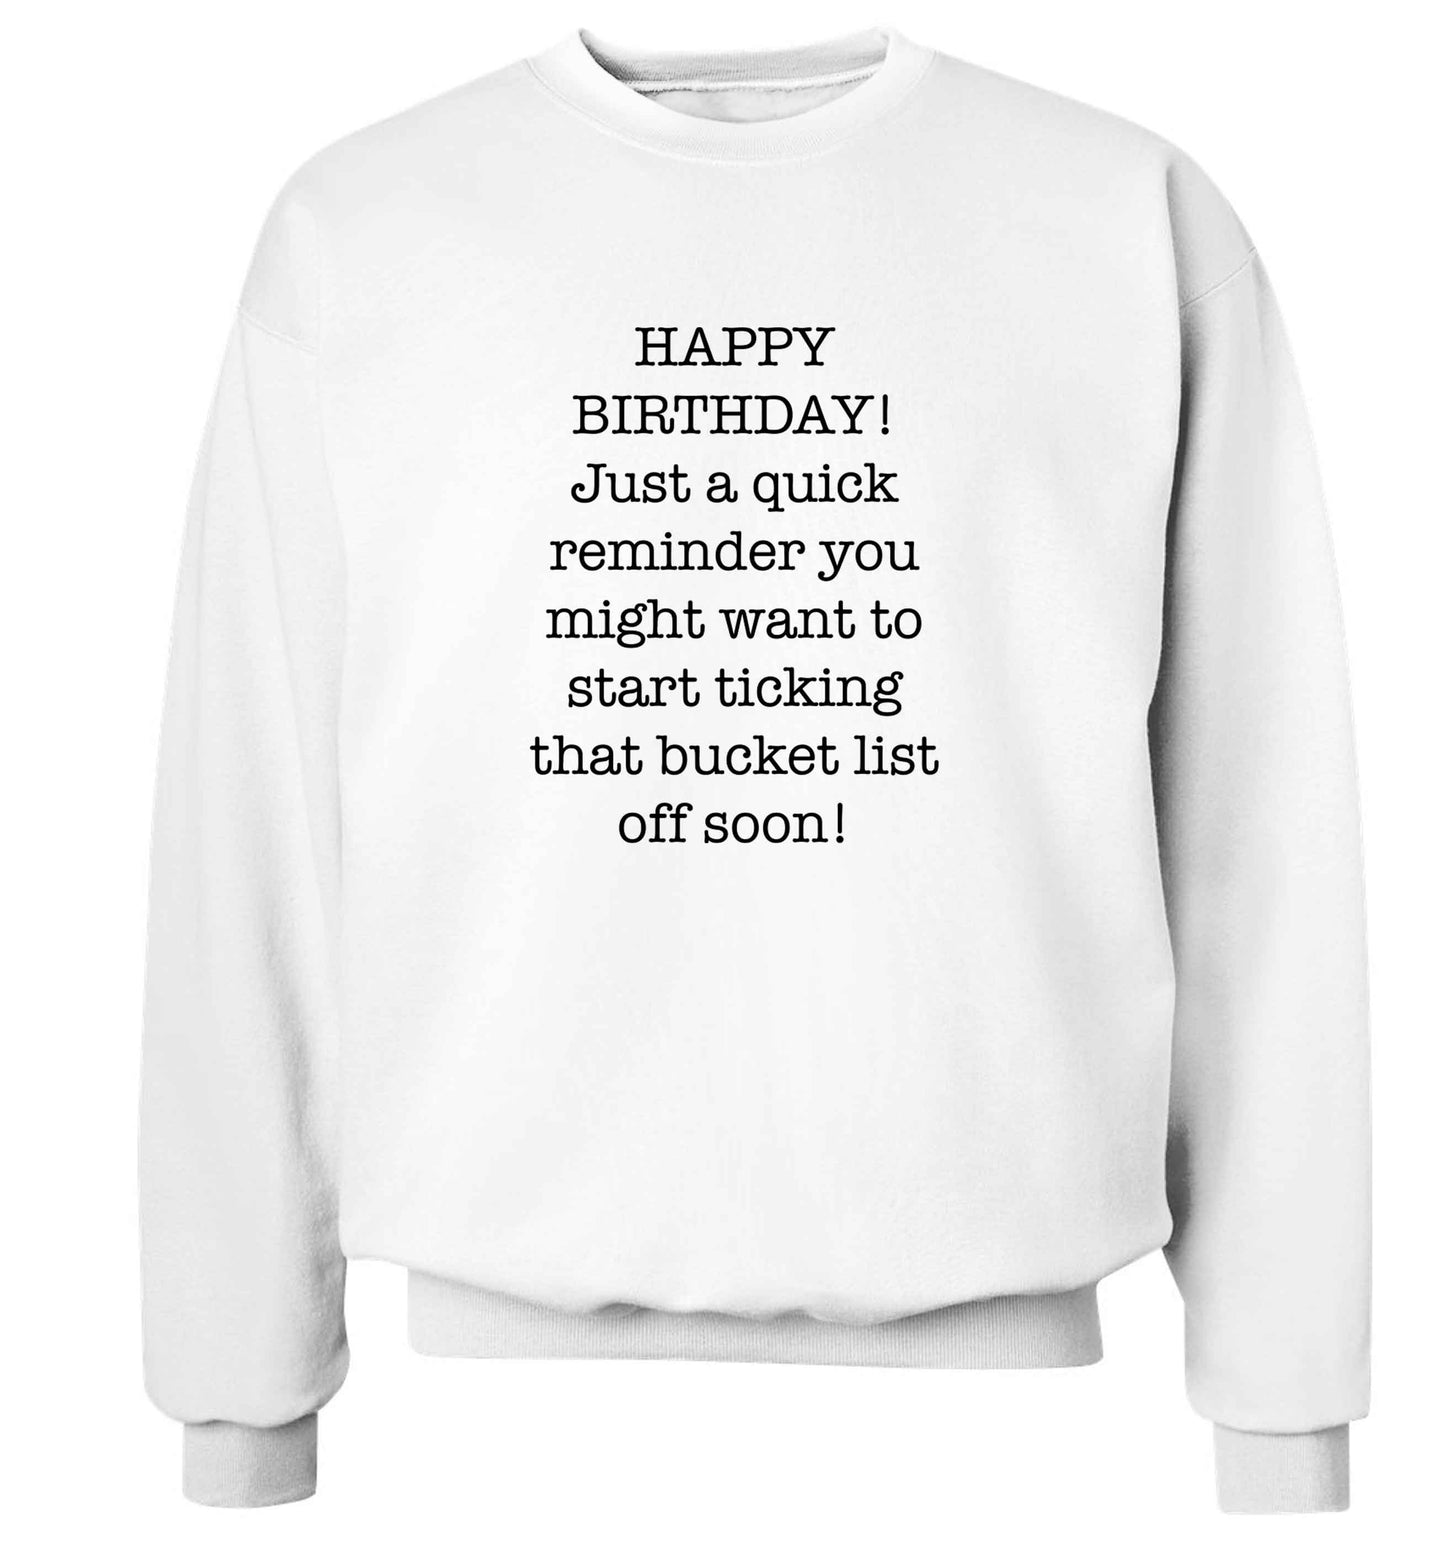 Happy birthday, just a quick reminder you might want to start ticking that bucket list off soon adult's unisex white sweater 2XL